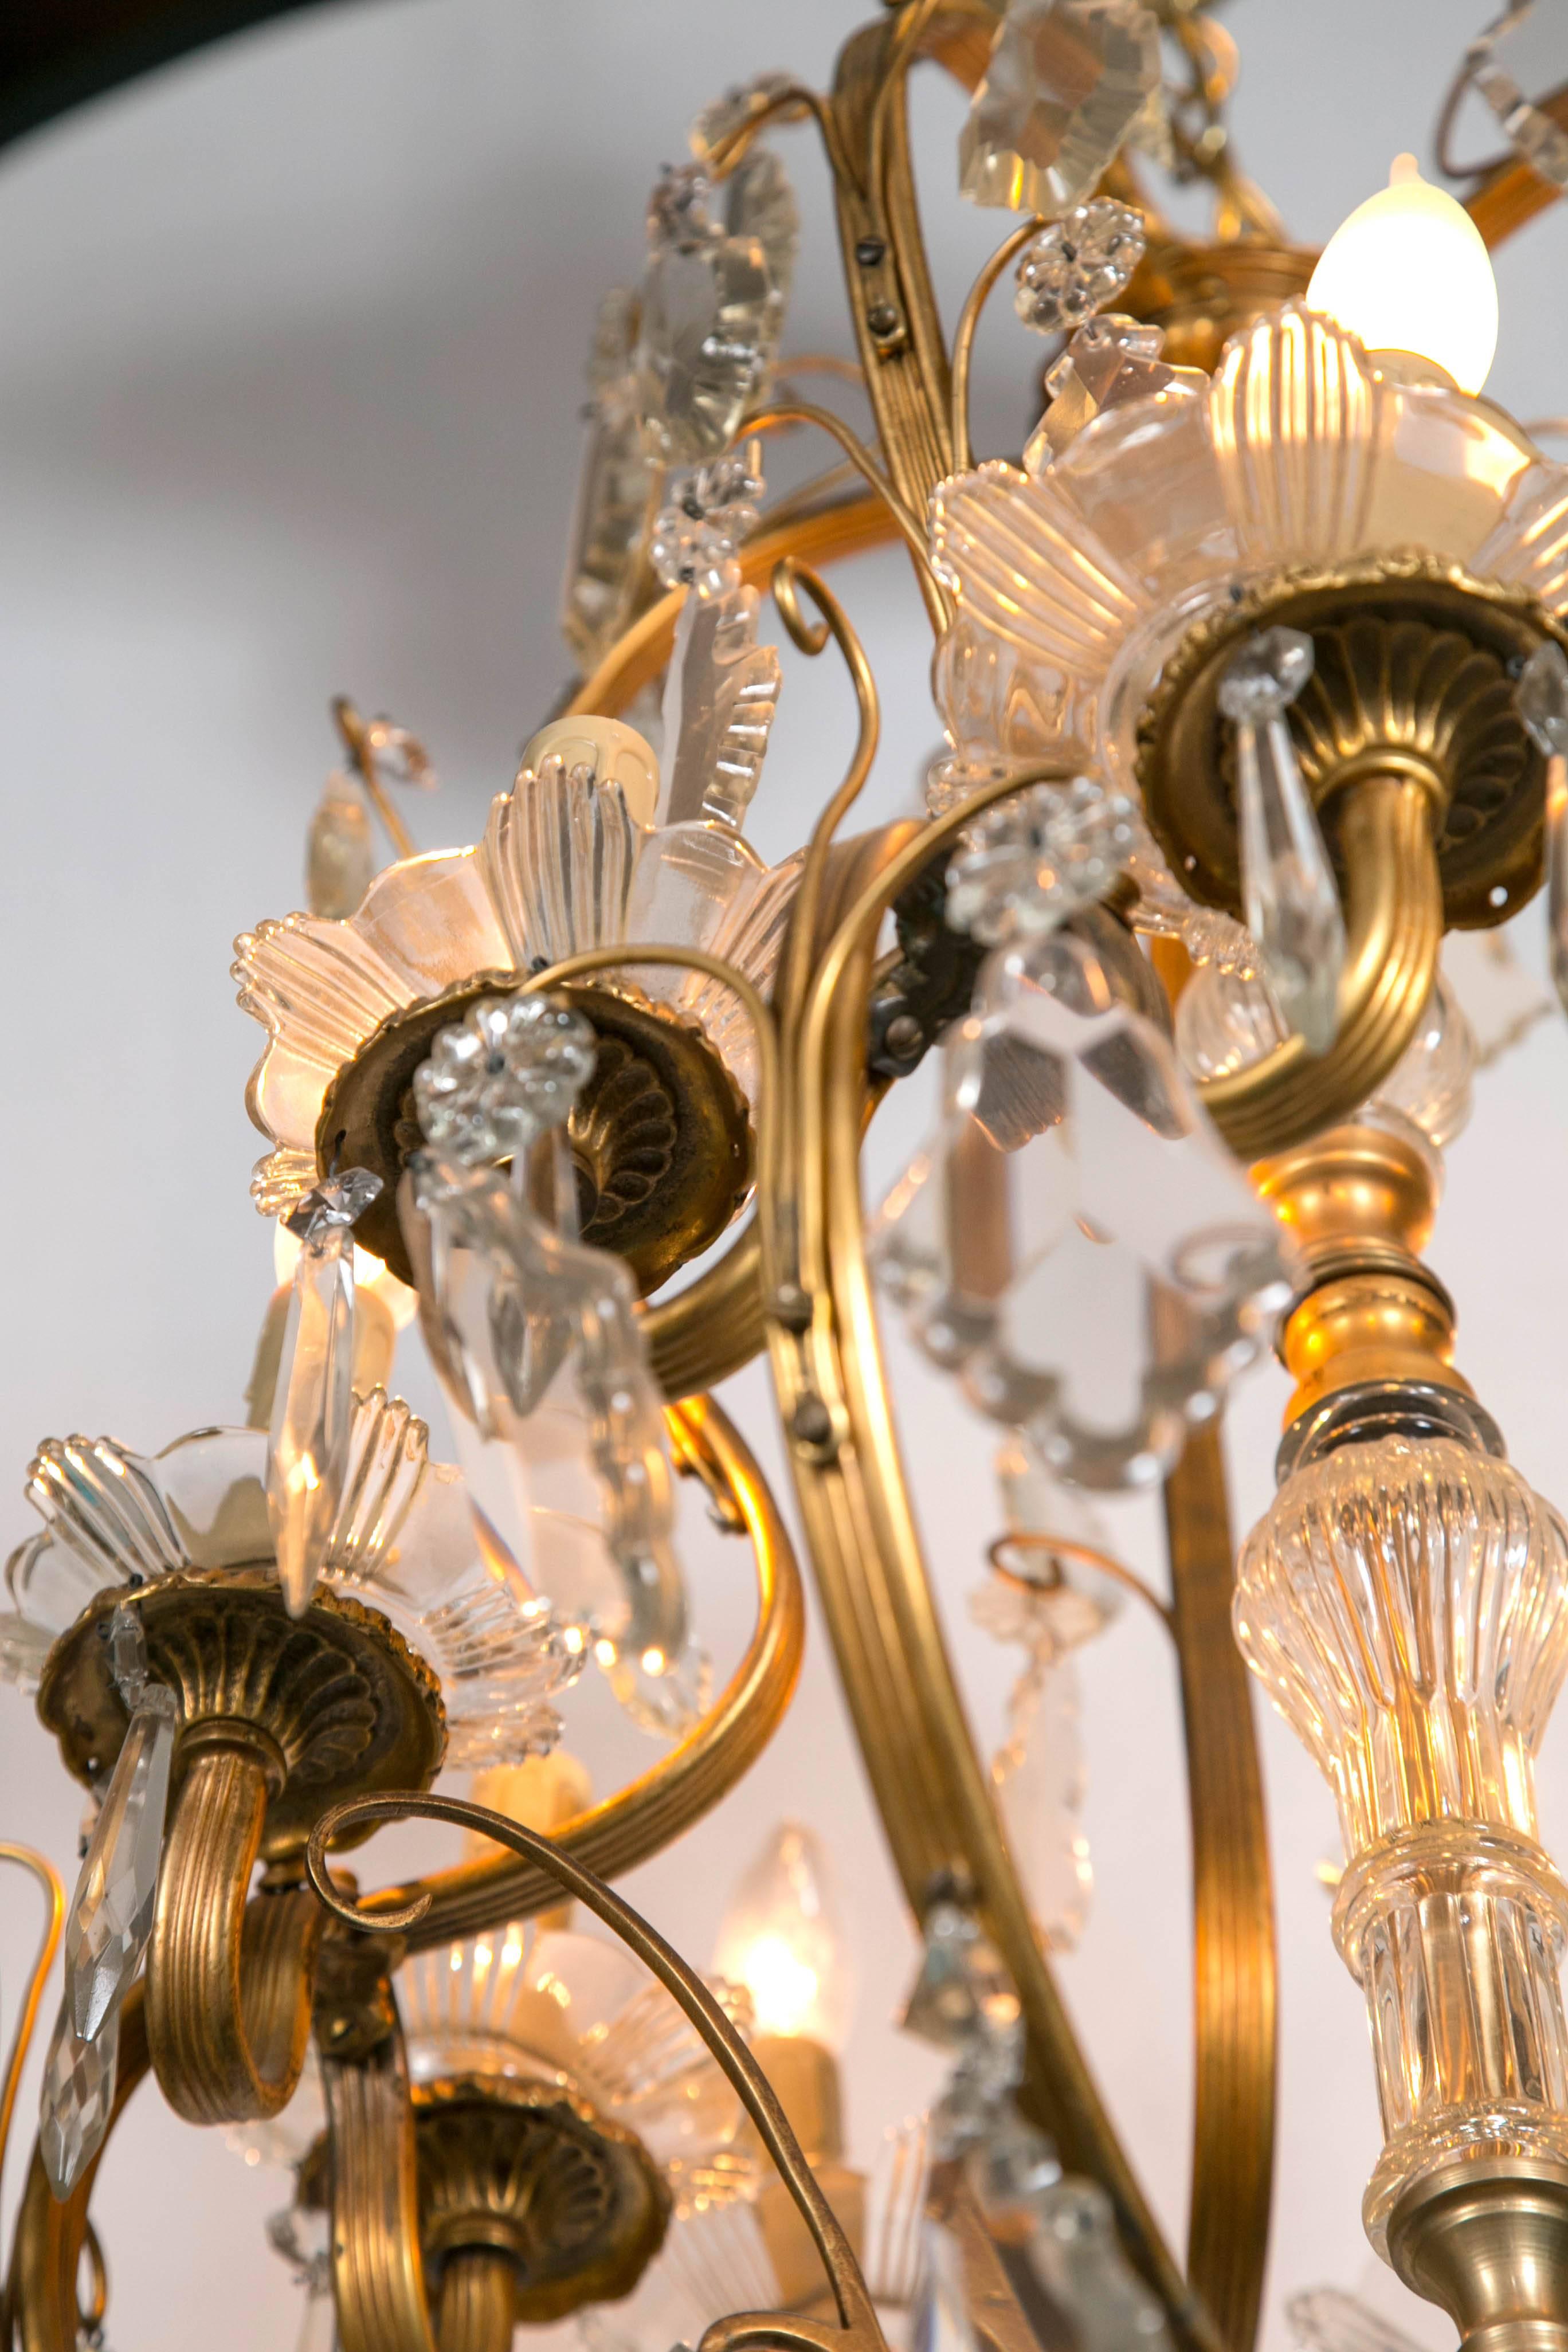 Mid-20th Century French Bronze and Crystal Chandelier in the Louis XVI Style